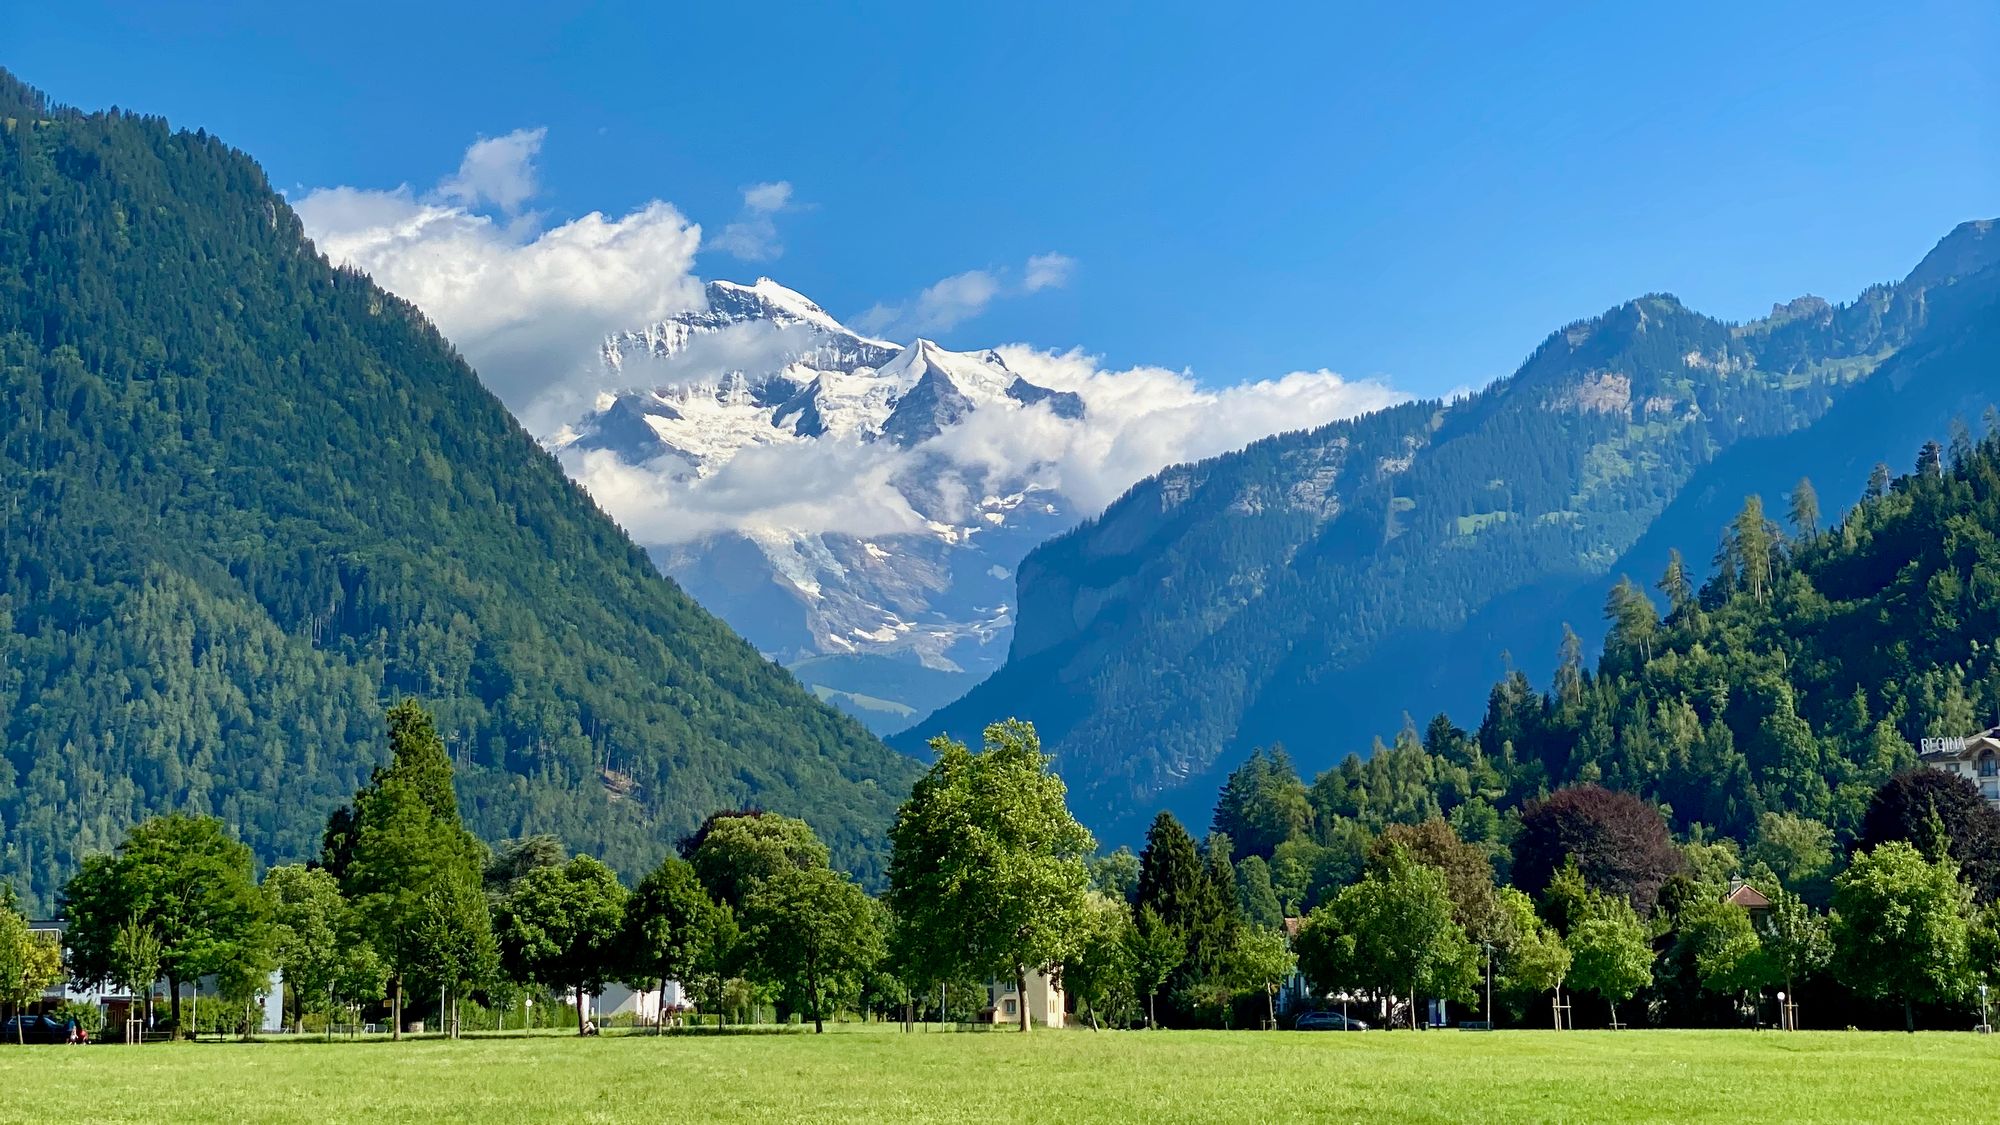 The Jungfrau mountain peeking through the clouds, viewed from Interlaken central park